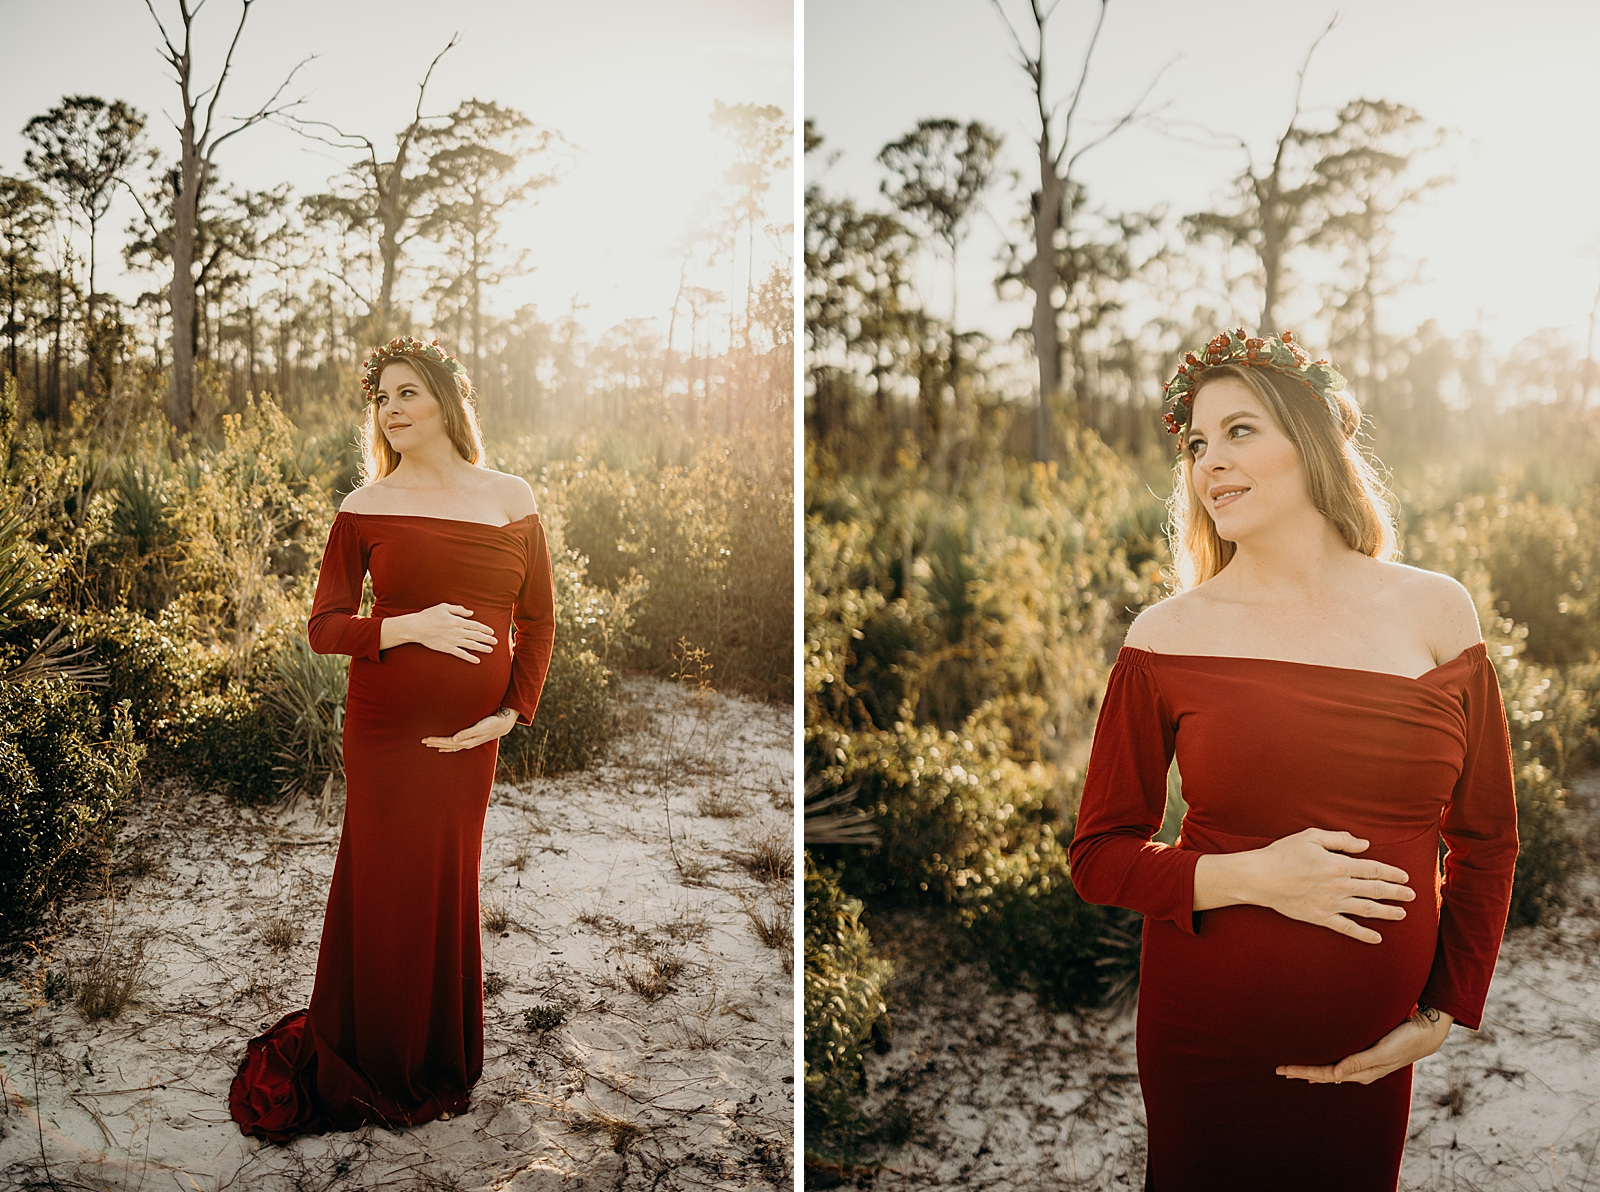 Pregnant woman holding baby bump with the sun shining on her Johnathan Dickinson Park Maternity Photography captured by South Florida Family Photographer Maggie Alvarez Photography